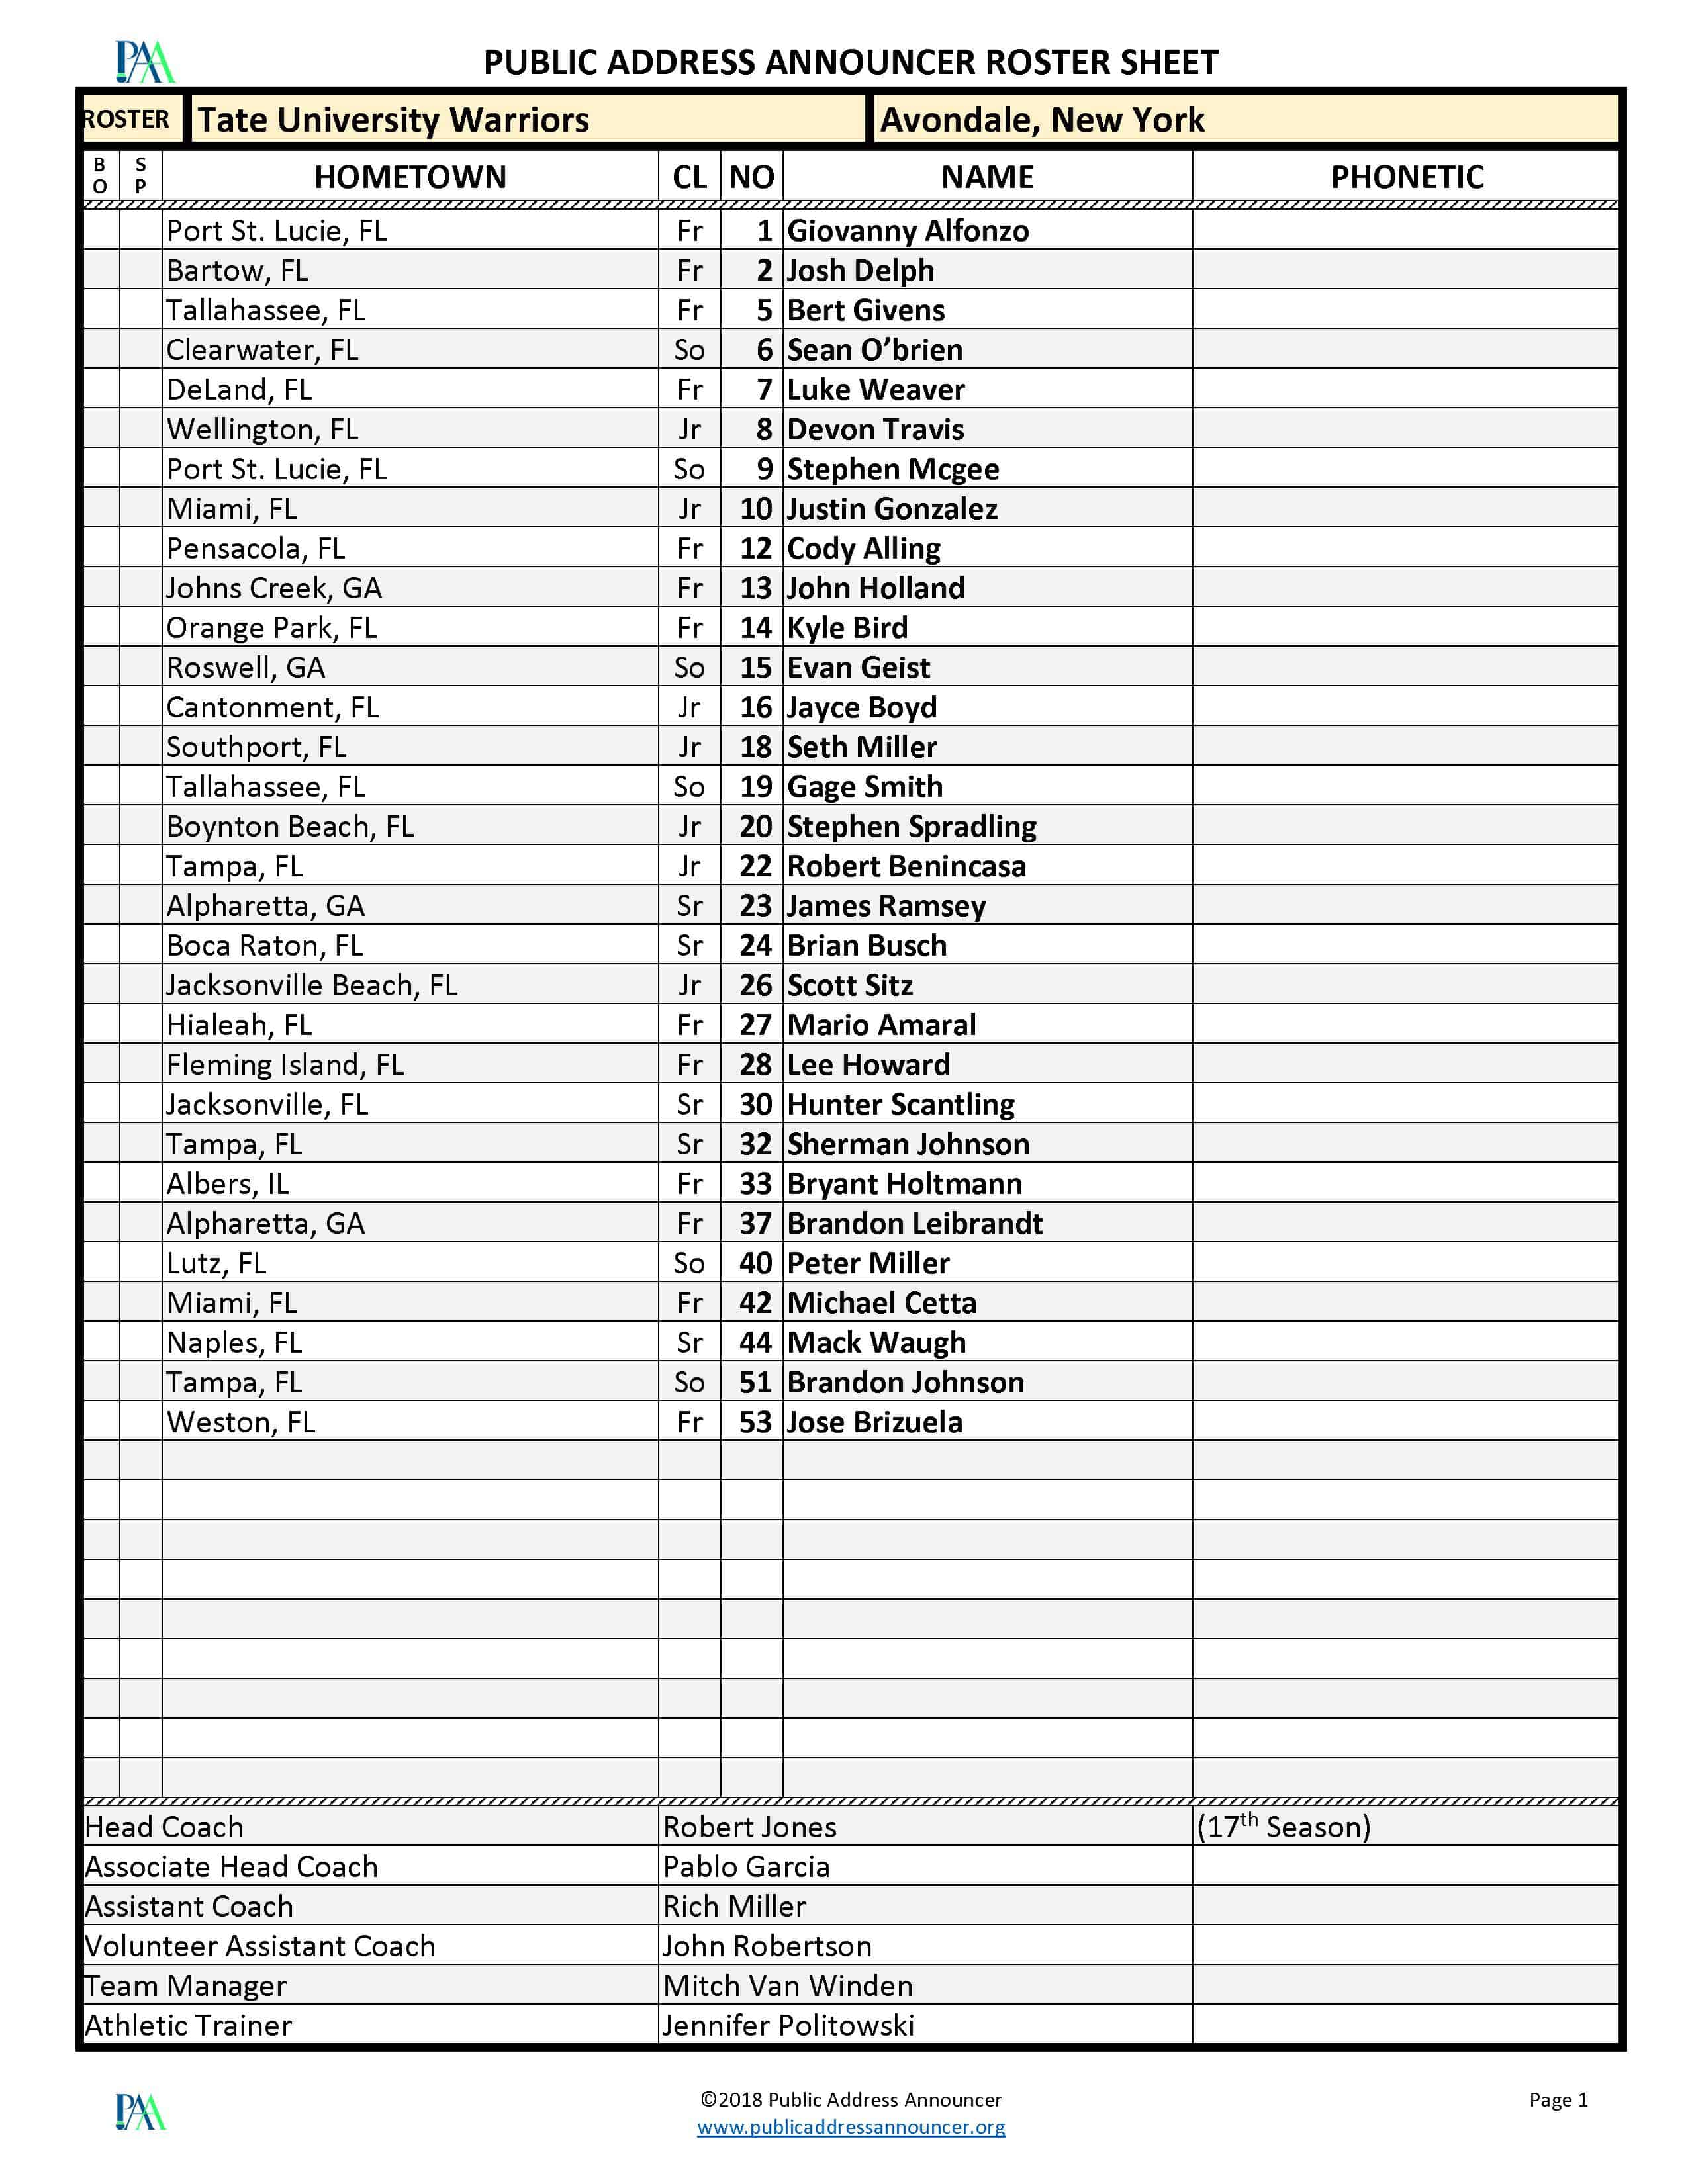 softball-roster-template-for-your-needs